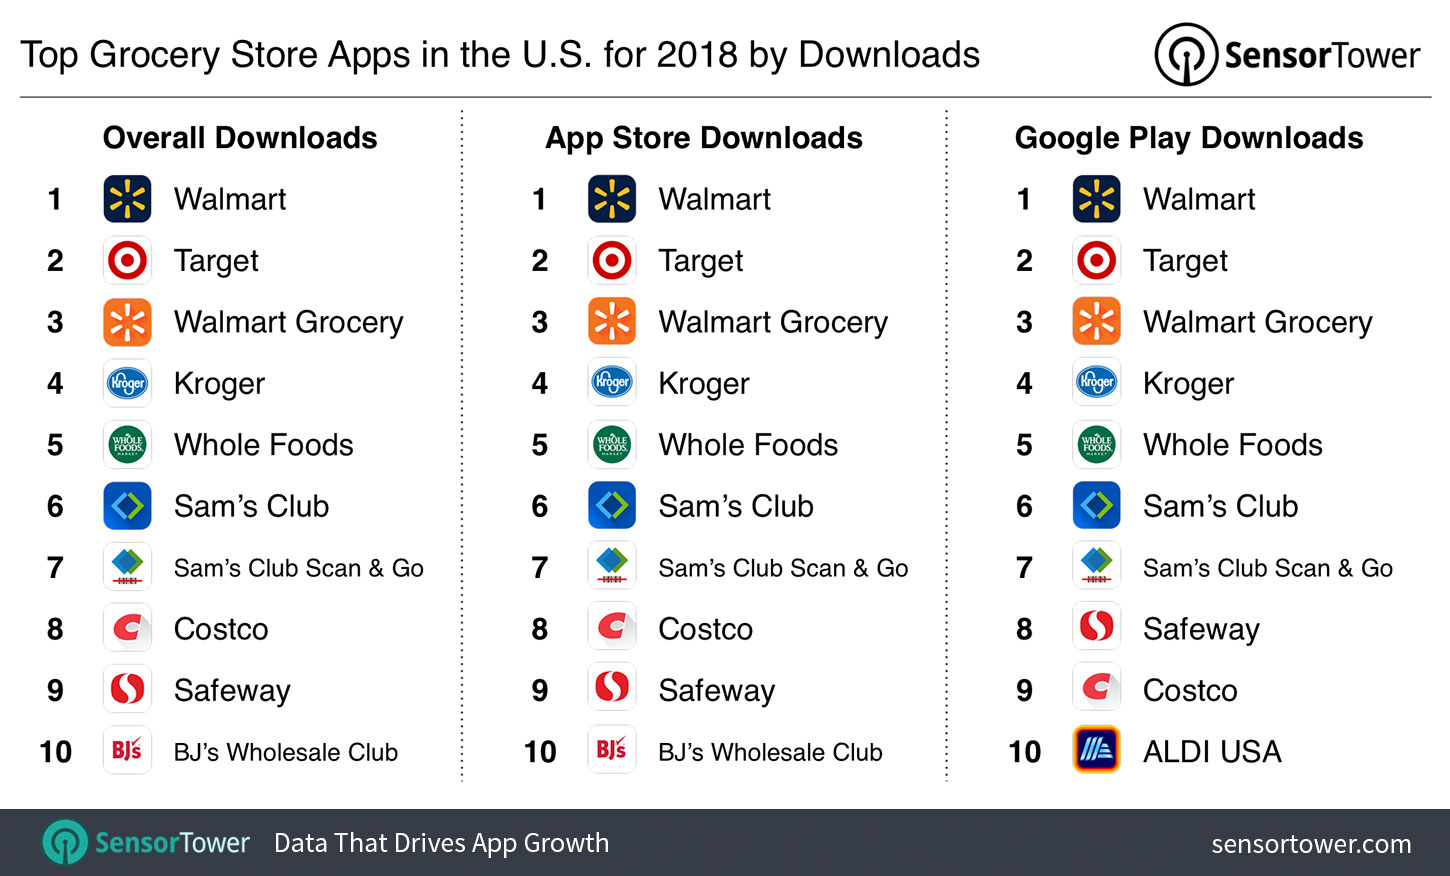 Top Grocery Store Apps for 2018 in the U.S.